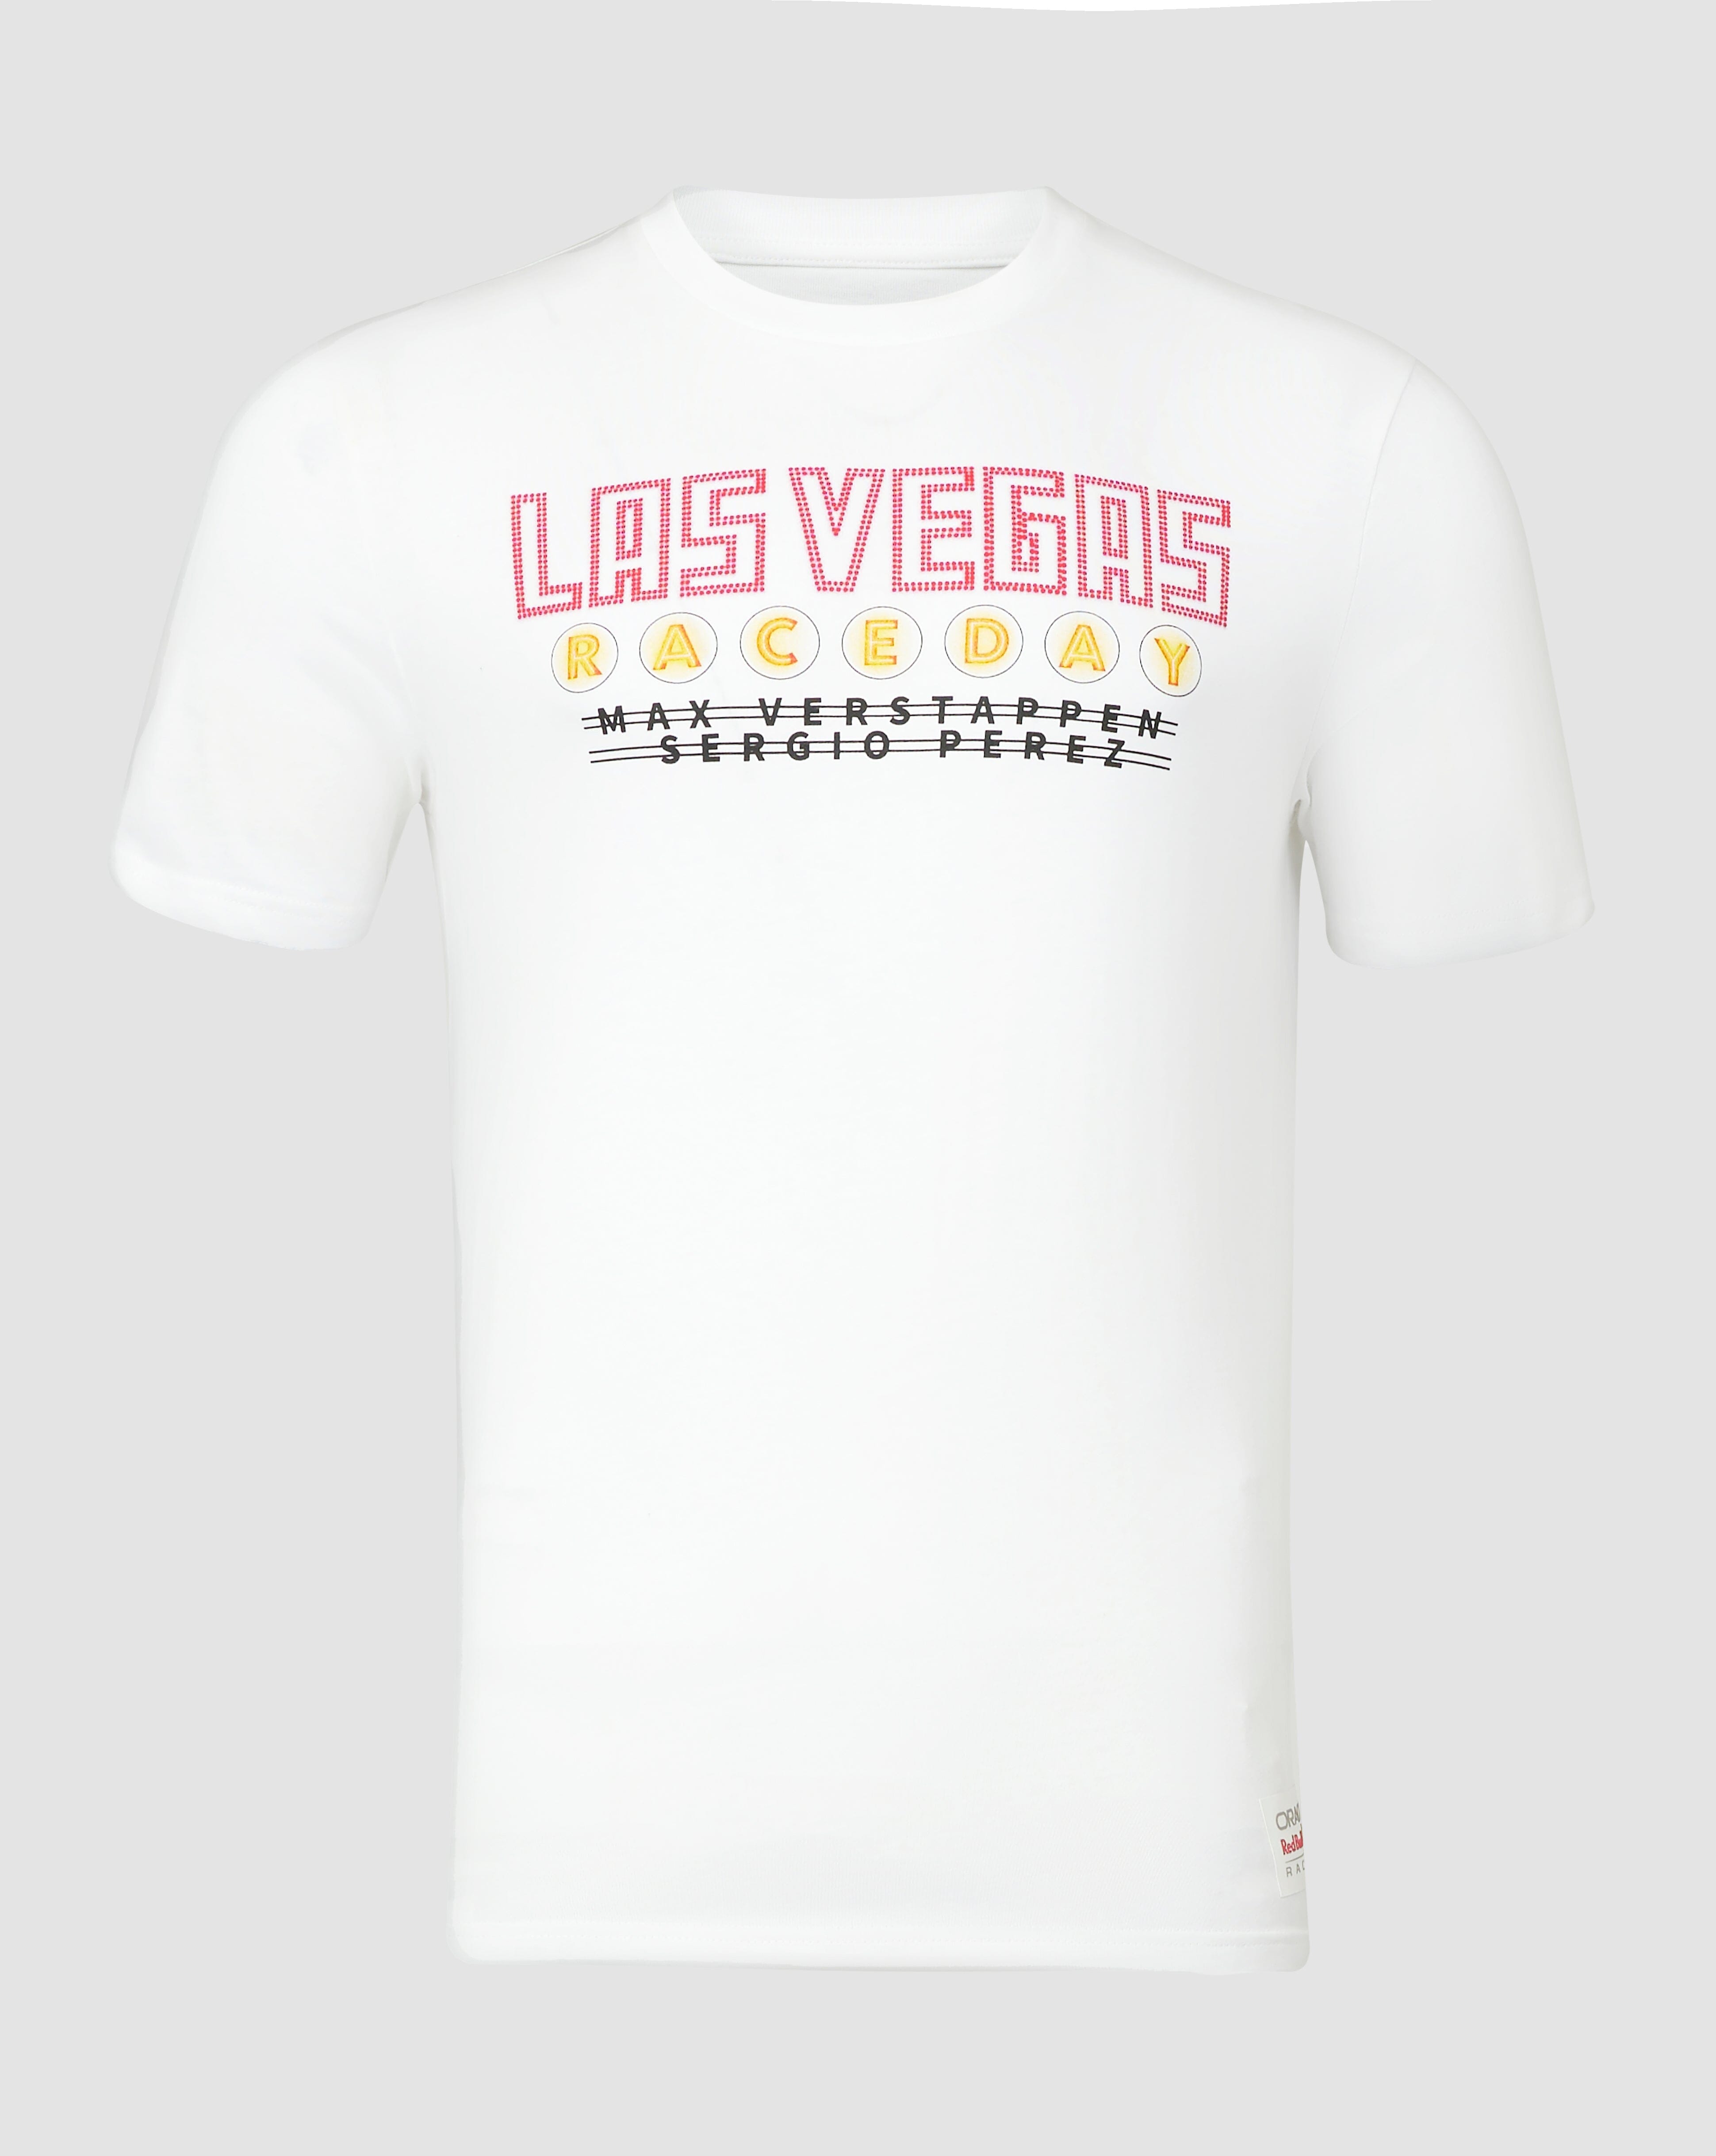 F1 Edition Special Las GP Bull Red Vegas White T-Shirt Racing -